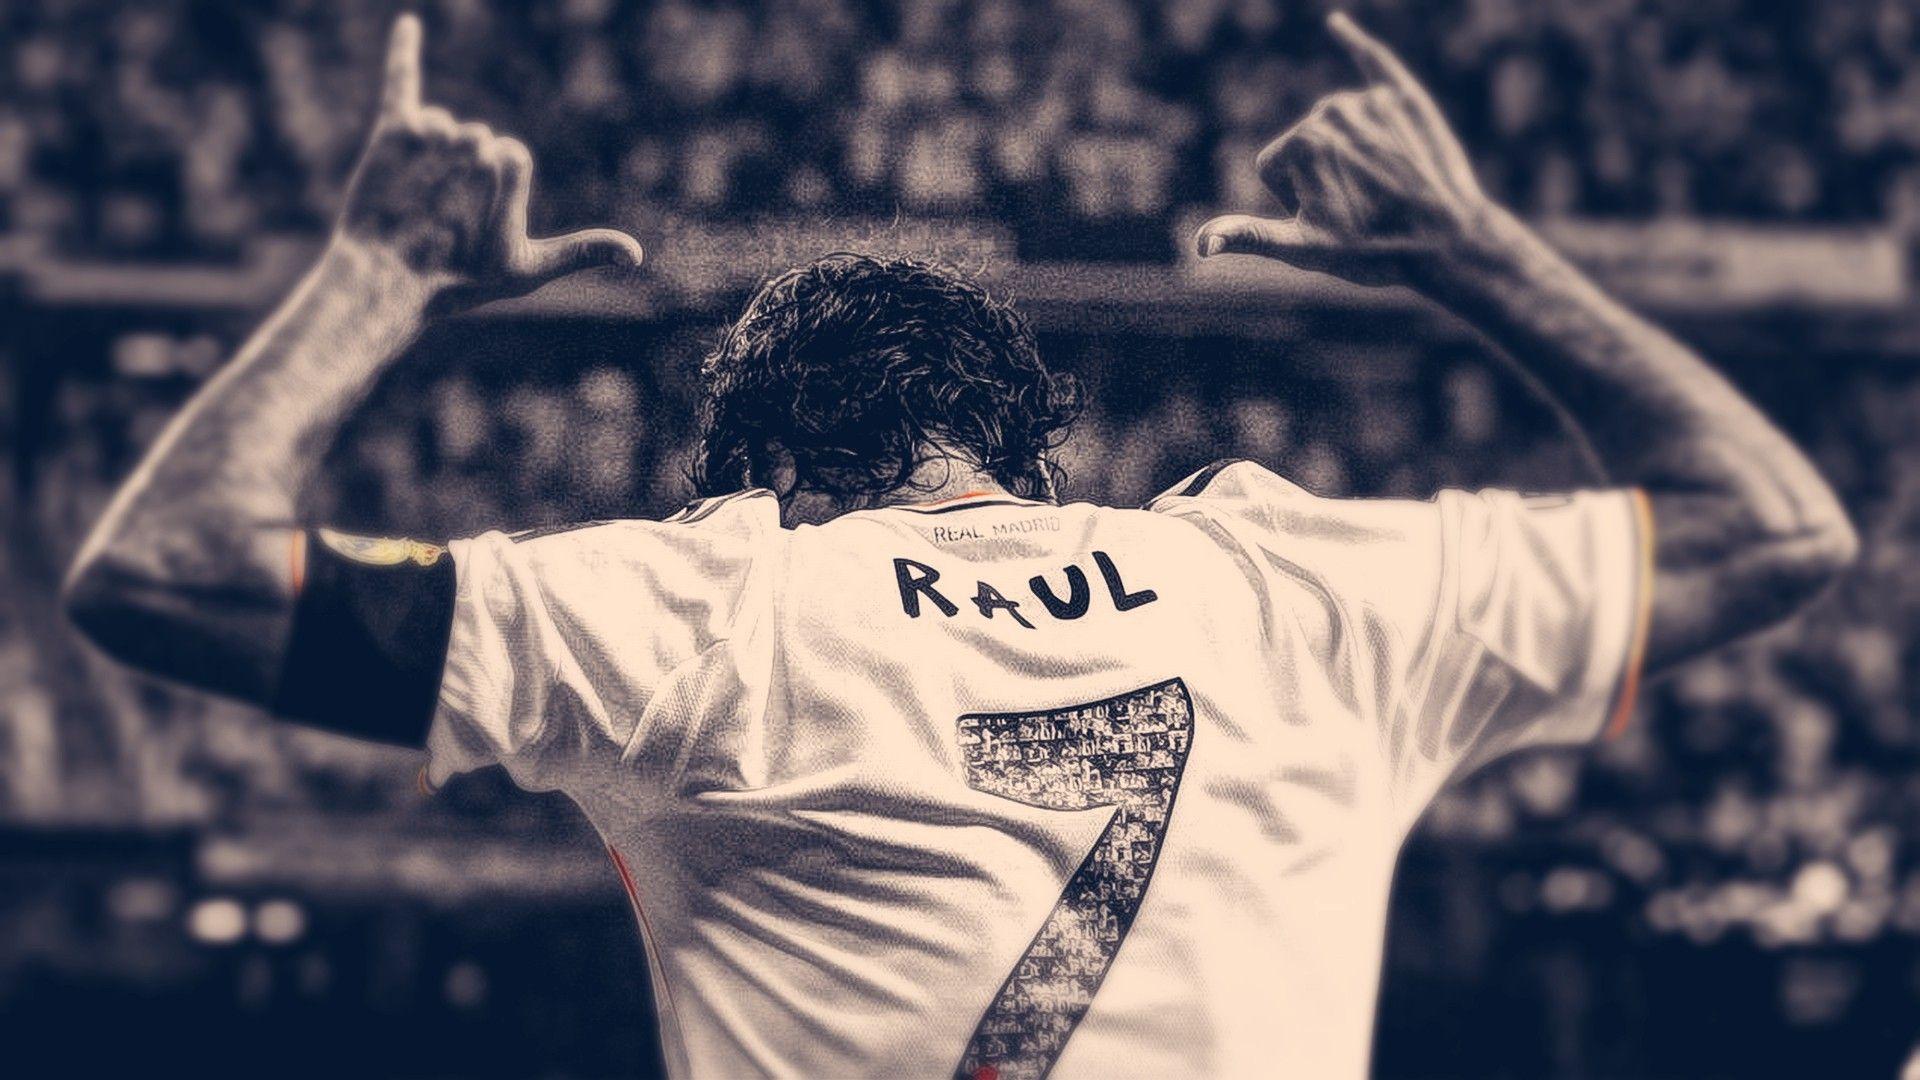 sports, soccer, legend, Real Madrid, HDR photography, Raul Gonzalez